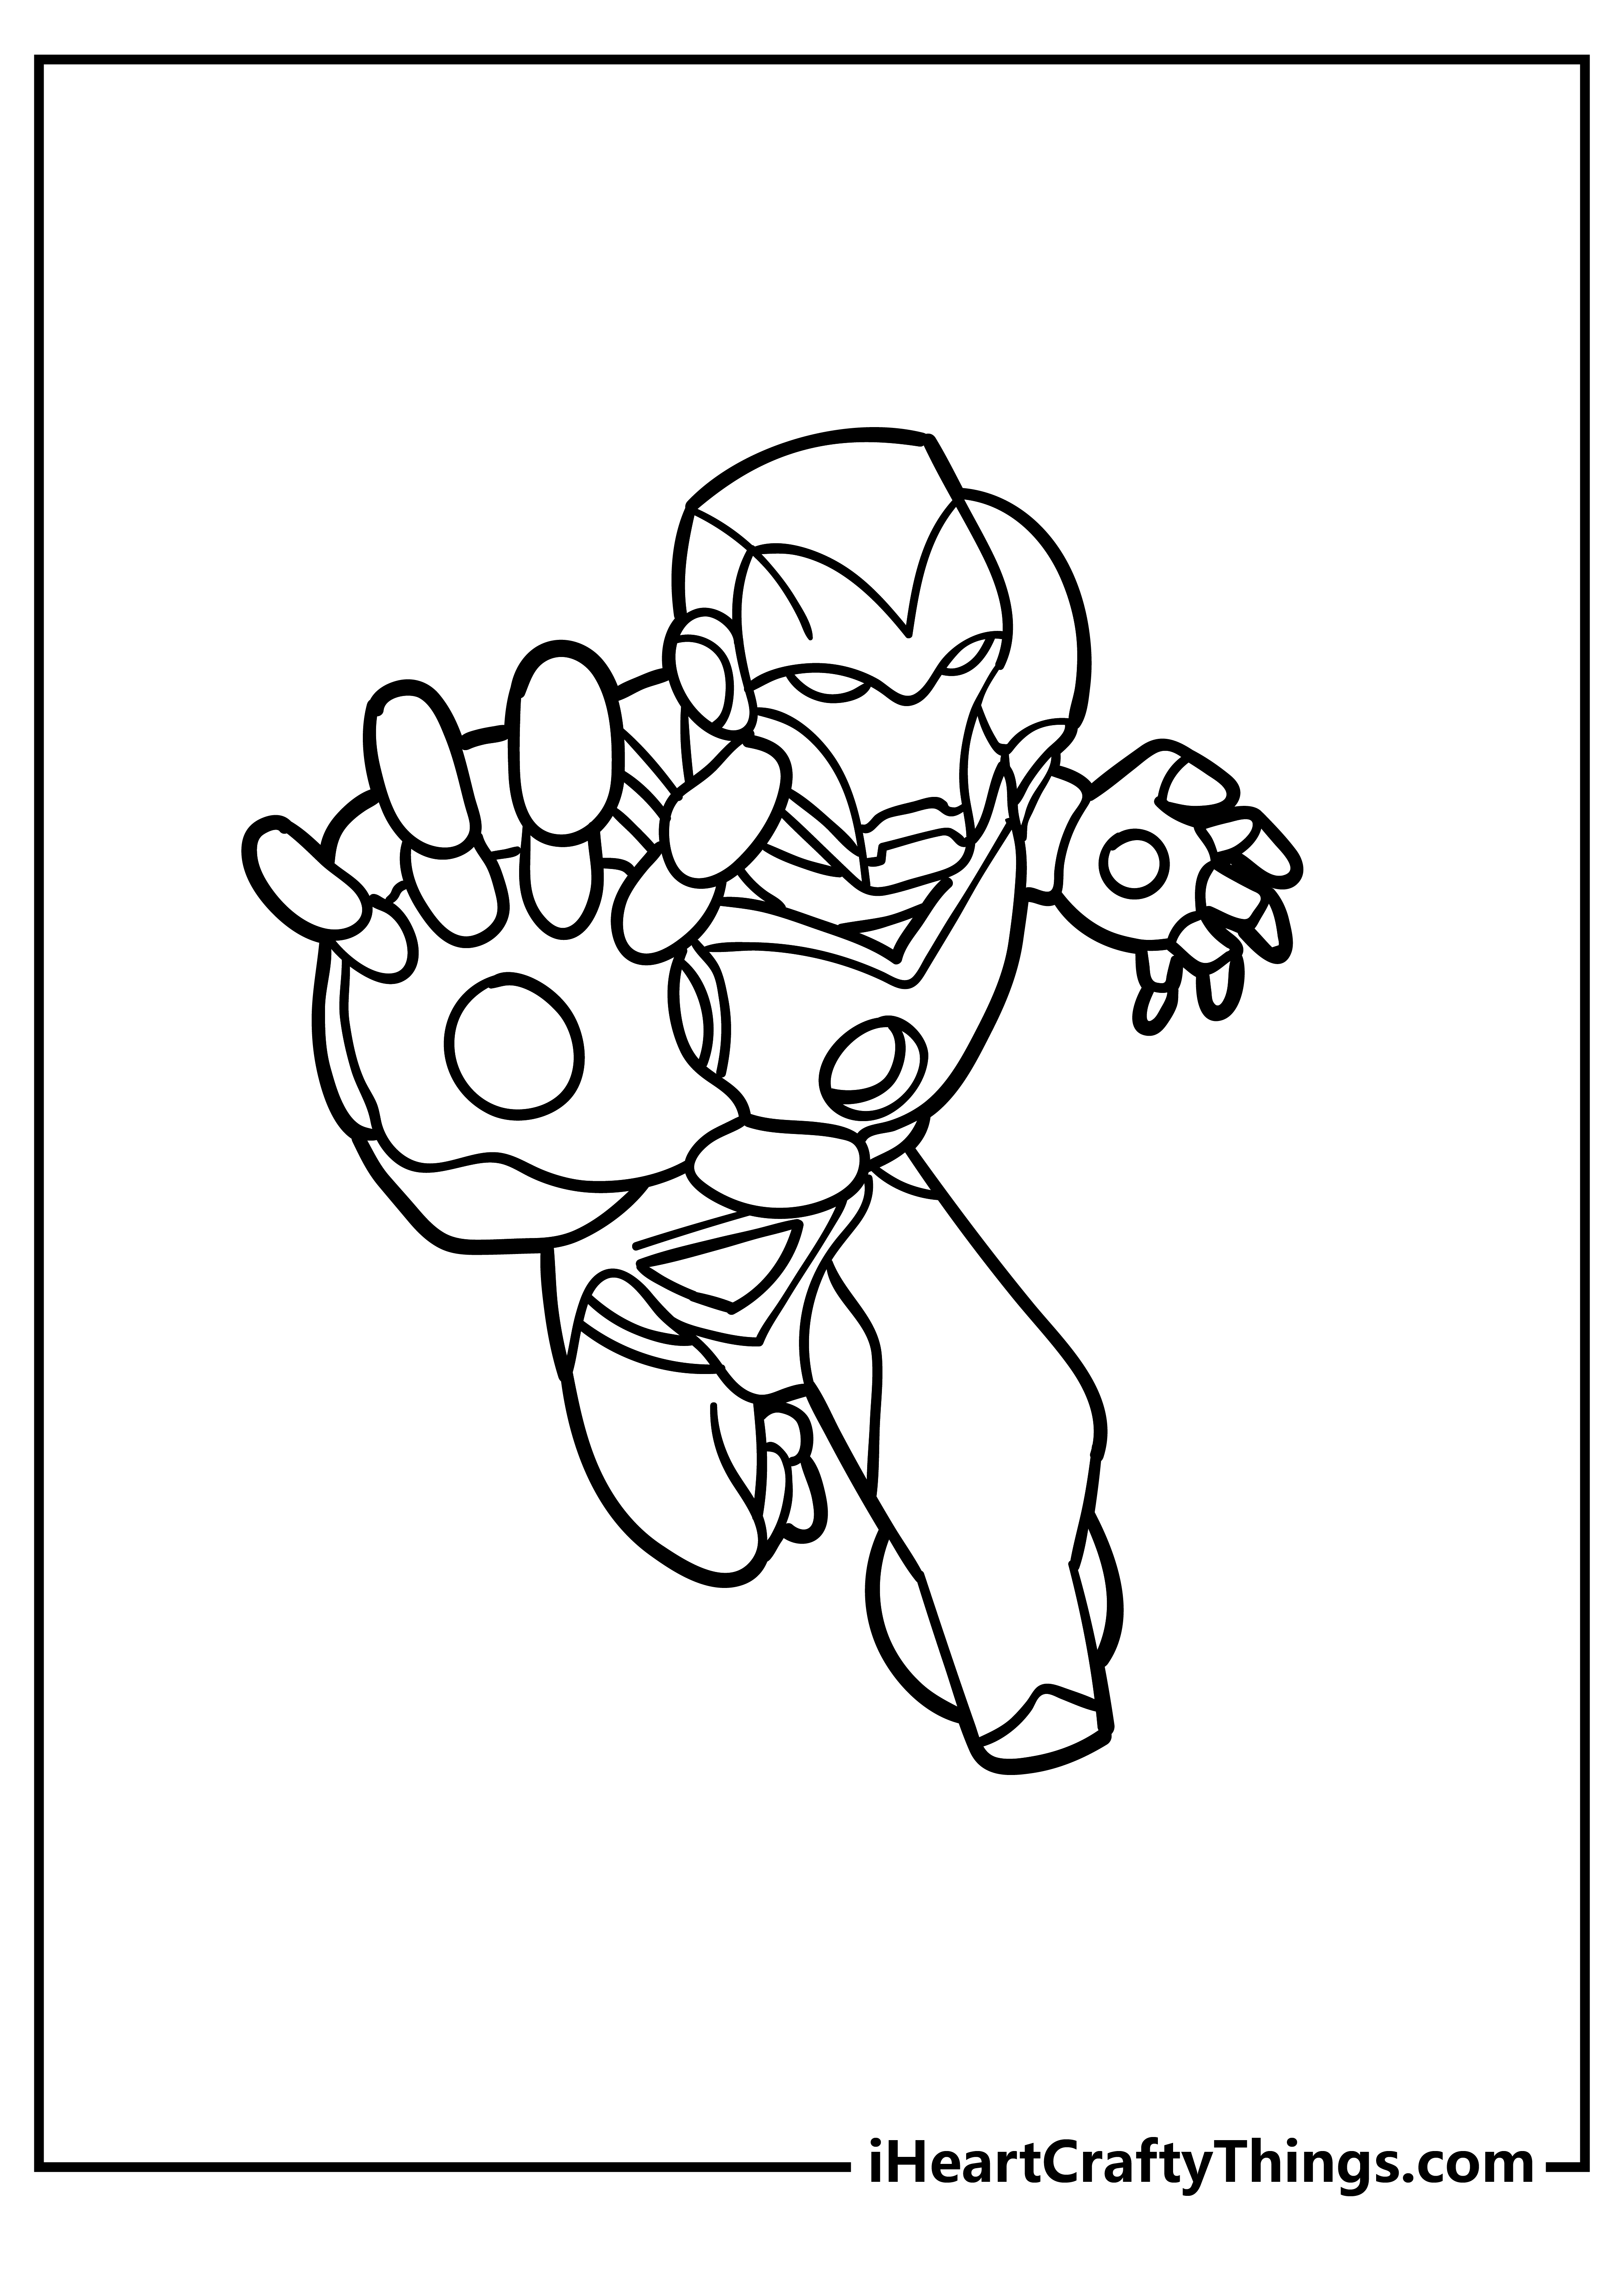 Avengers Coloring Pages free pdf